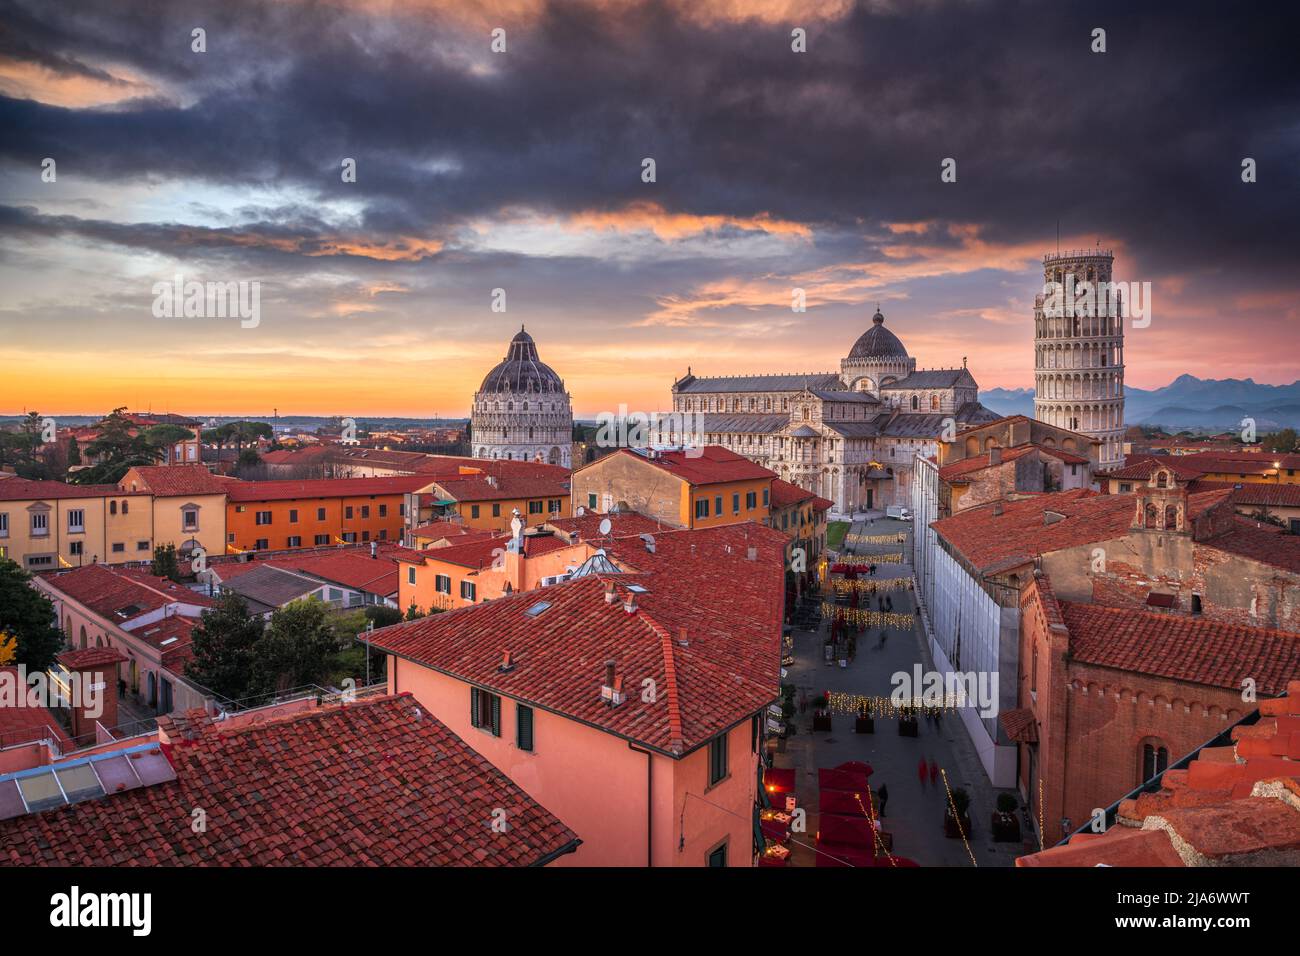 Pisa, Italy old town skyline with the cathedral and tower at dusk. Stock Photo